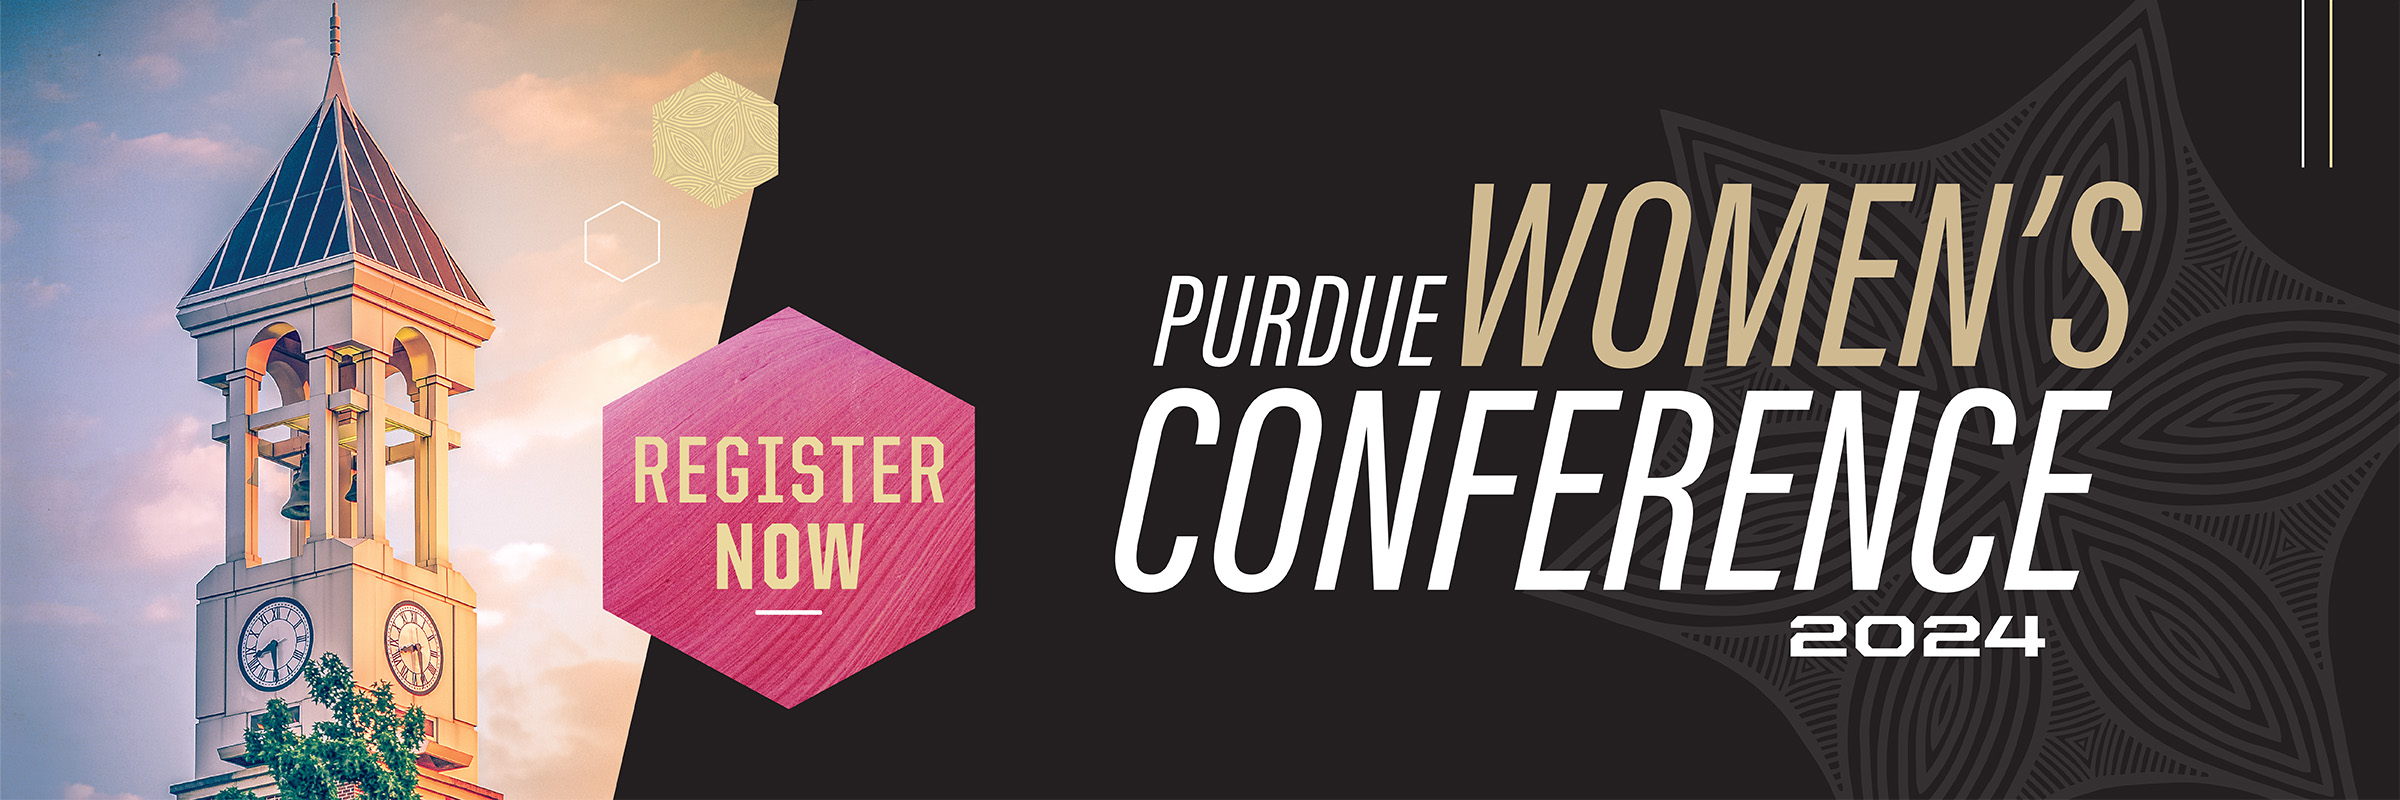 Image displaying the Purdue Women's Conference 2024 website banner with text inviting people to register.